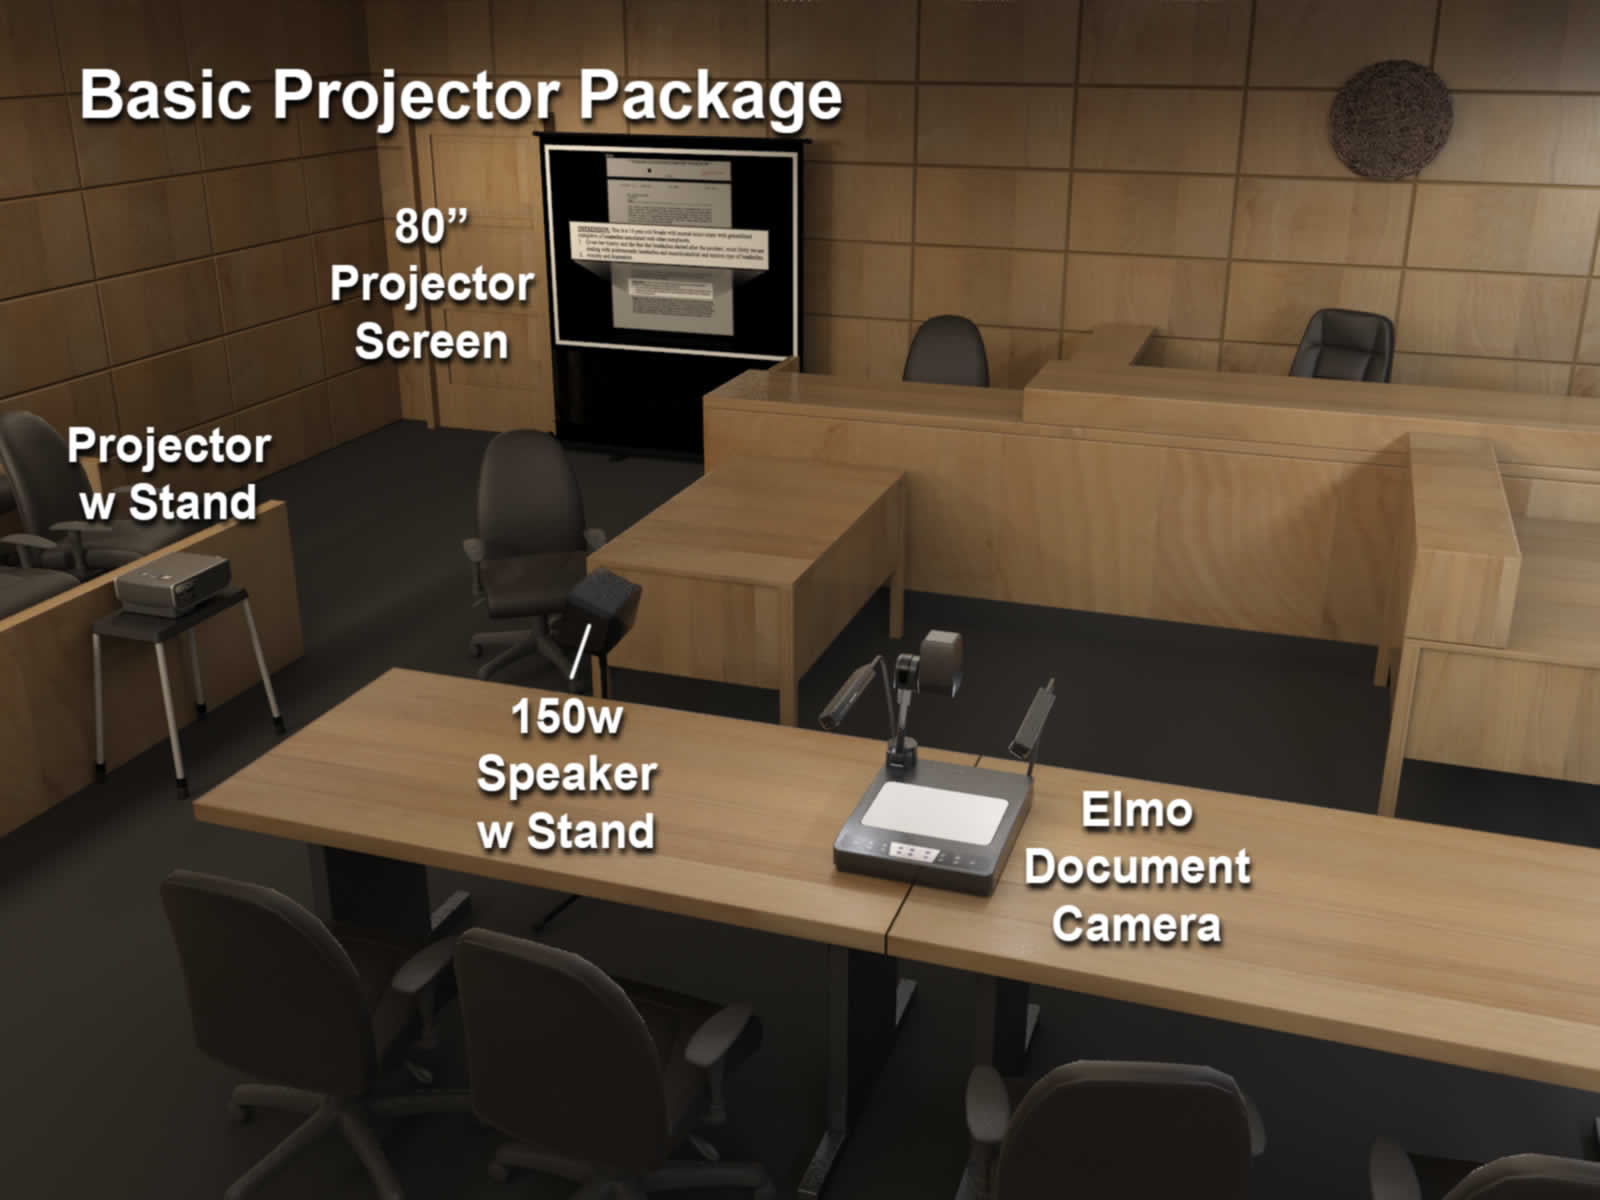 Basic Projector Package